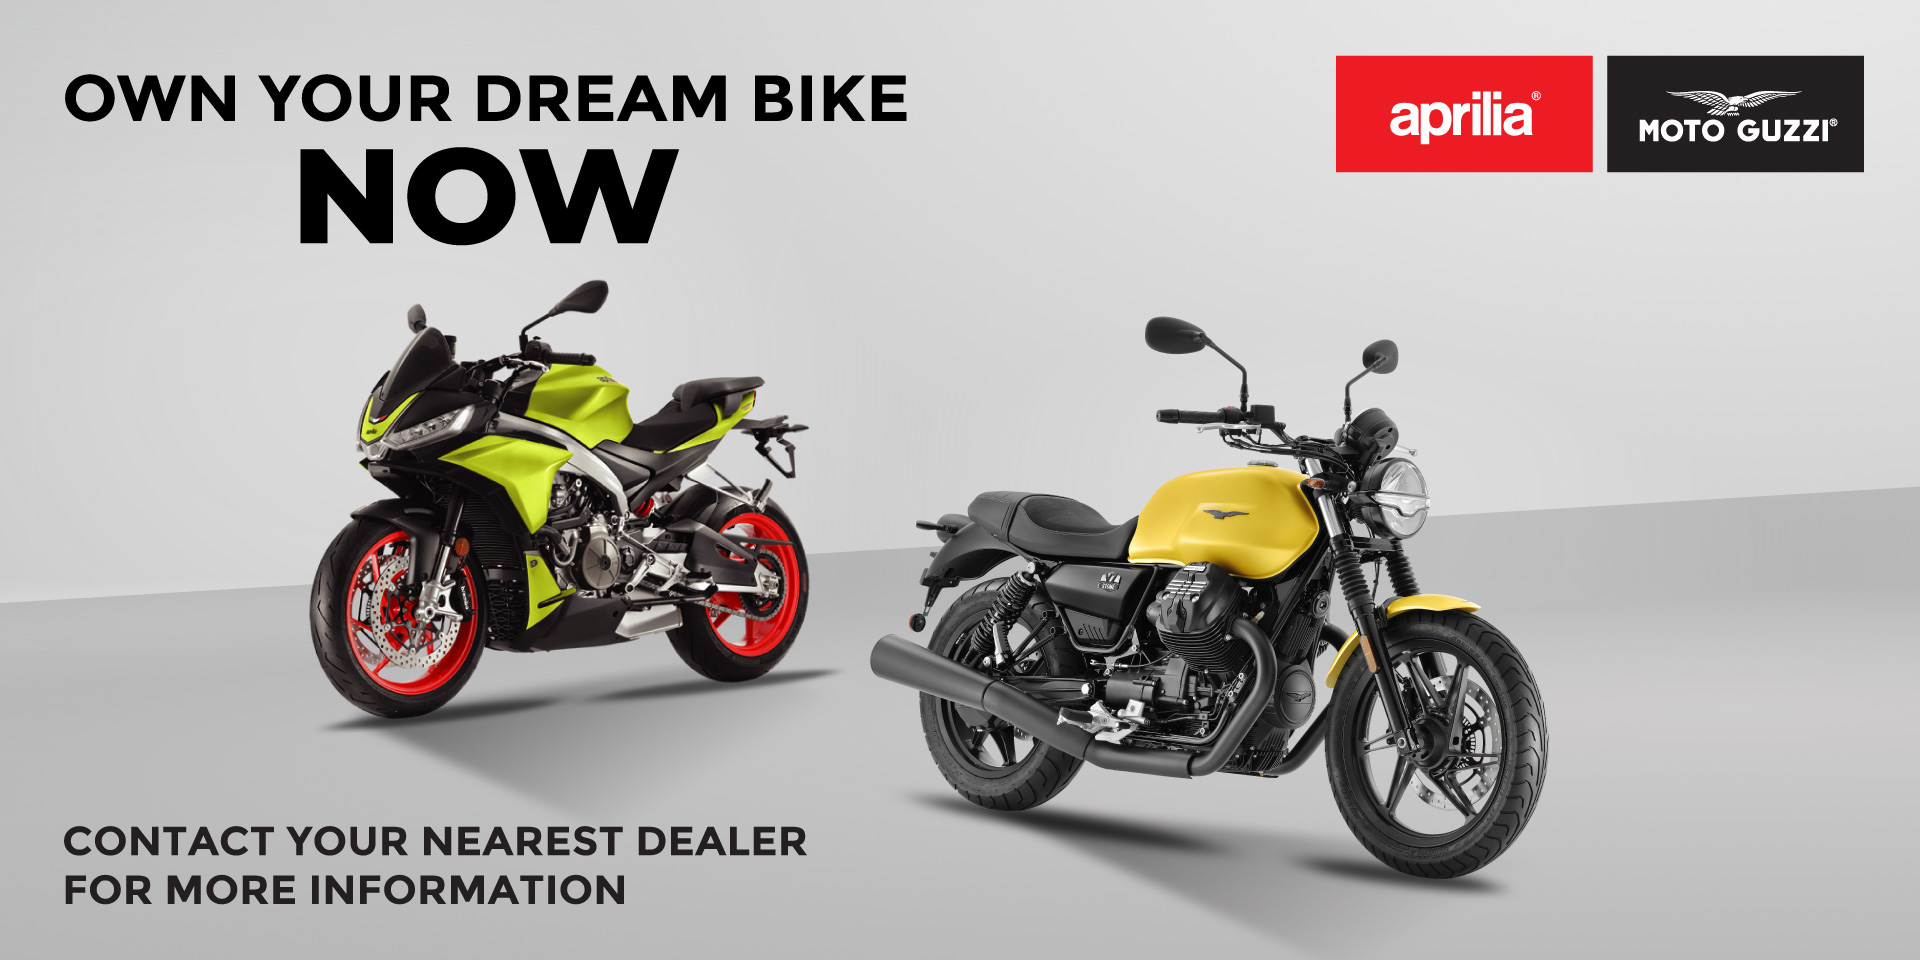 OWN YOUR DREAM BIKE NOW